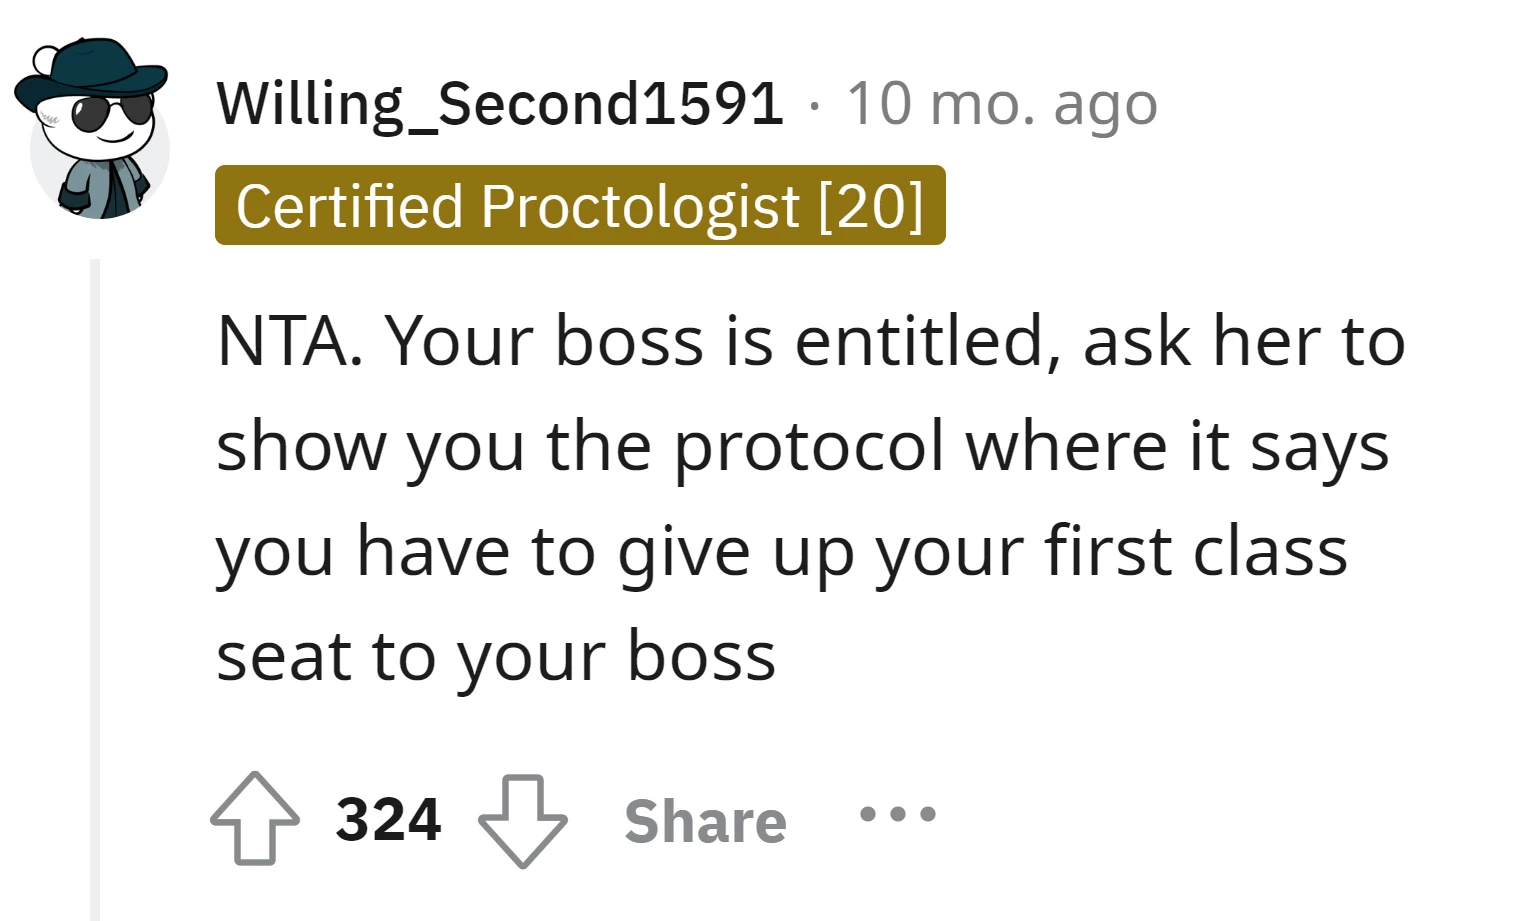 "Your boss is entitled"